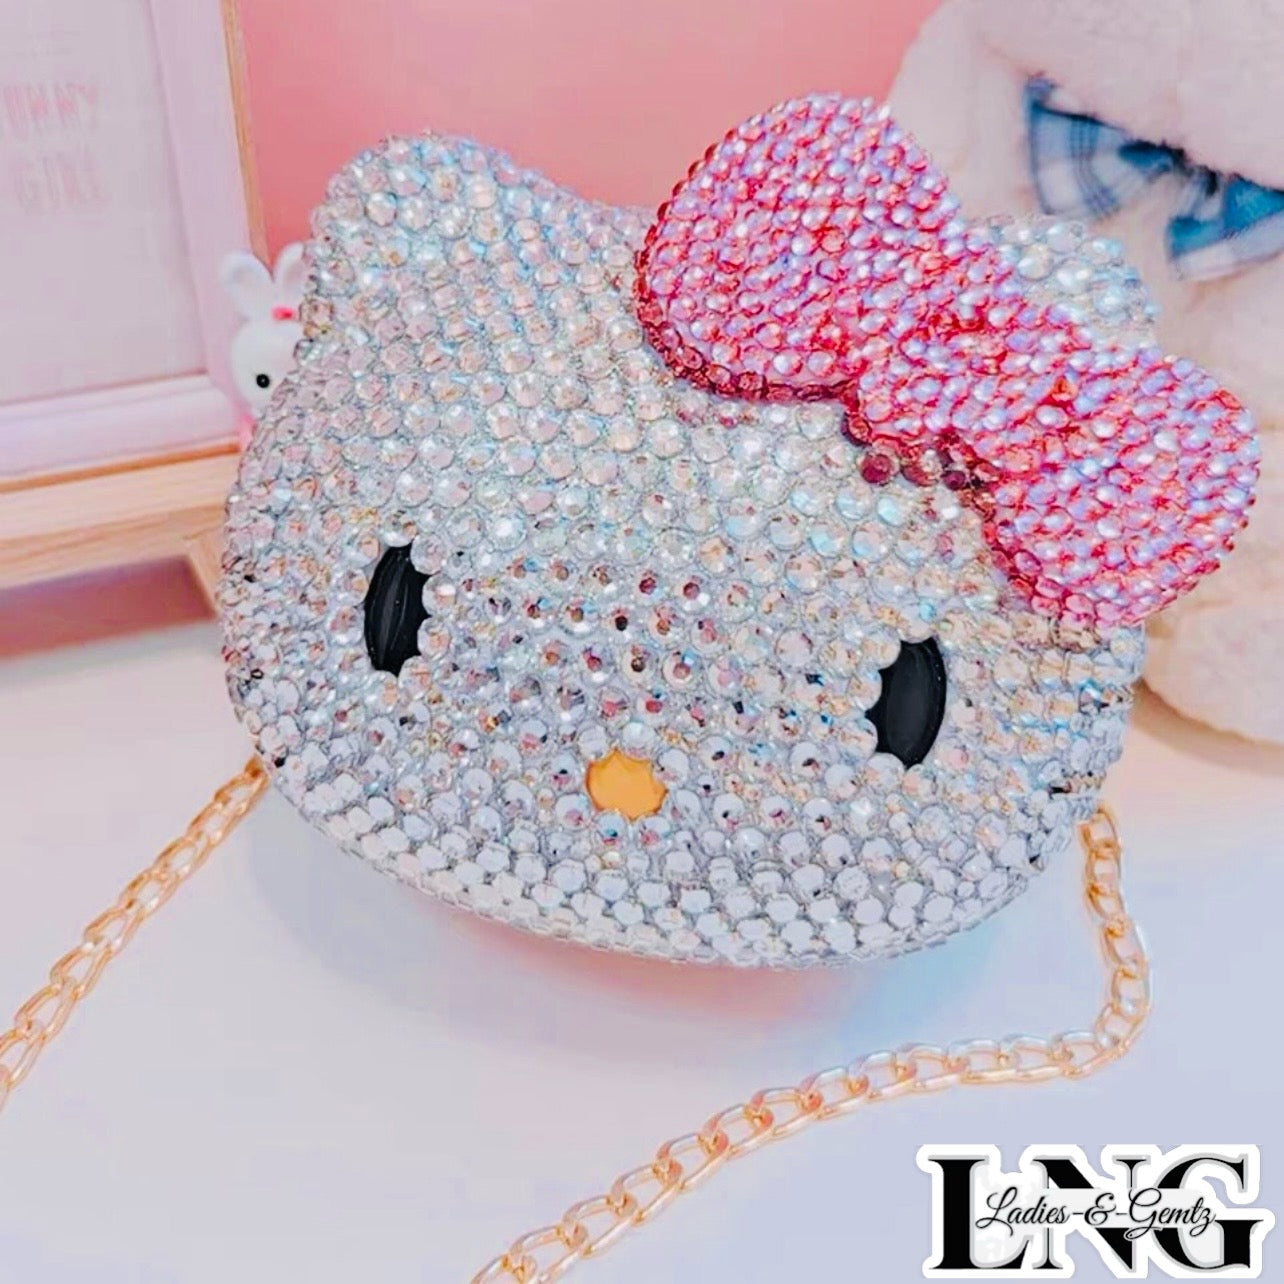 LOUNGEFLY SANRIO HELLO KITTY SWEET TREATS CROSSBODY BAG – Collectors Outlet  llc